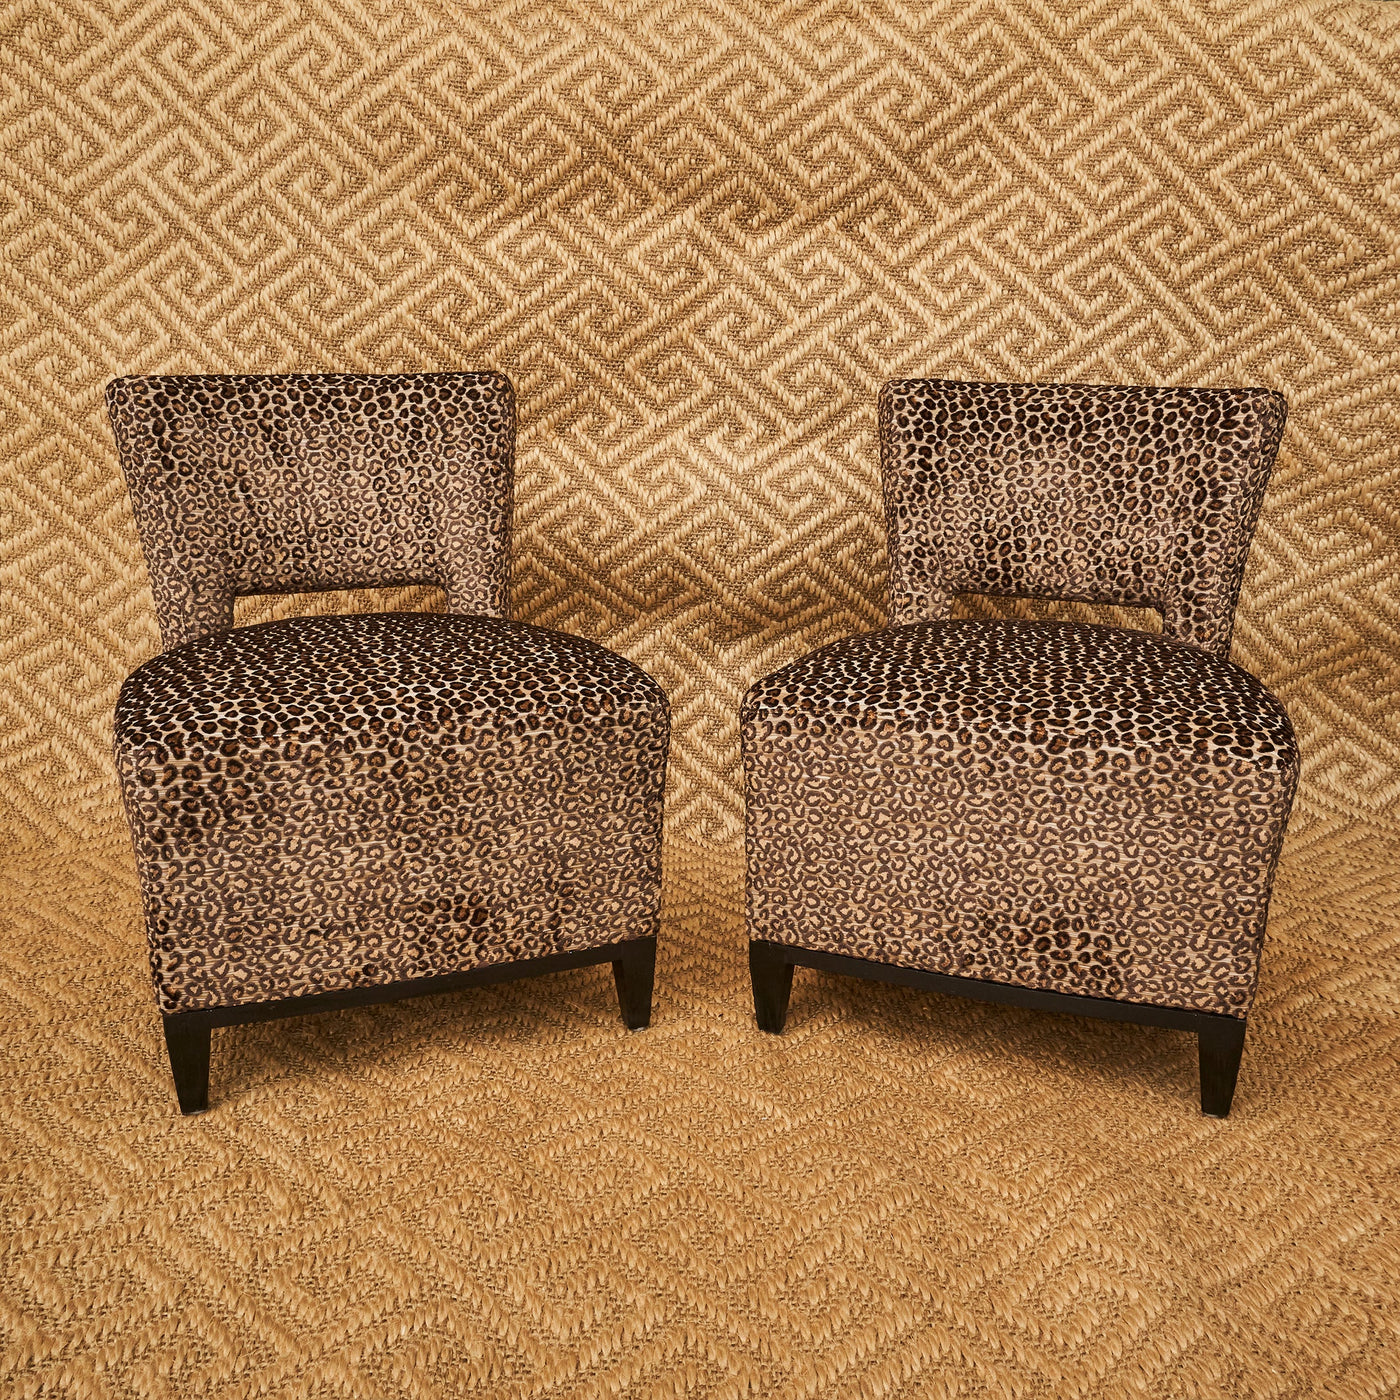 Pair of reupholstered chairs in raised leopard velvet Colefax and Fowler Wilde Fabric.